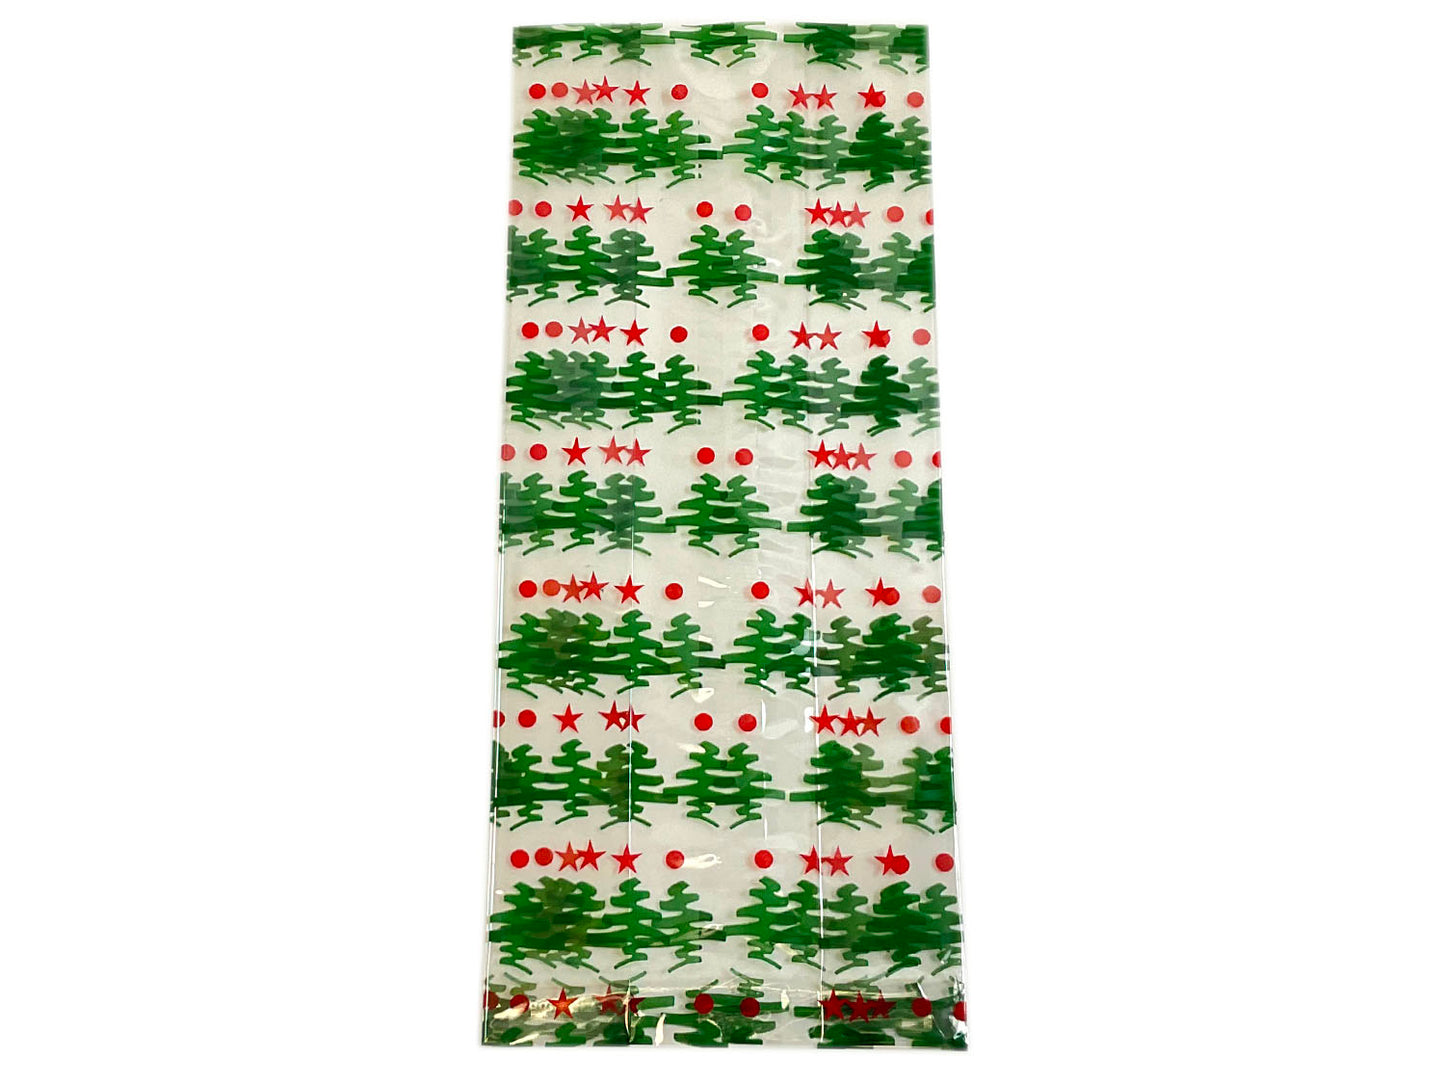 Party Favor Bag - Green Christmas Trees